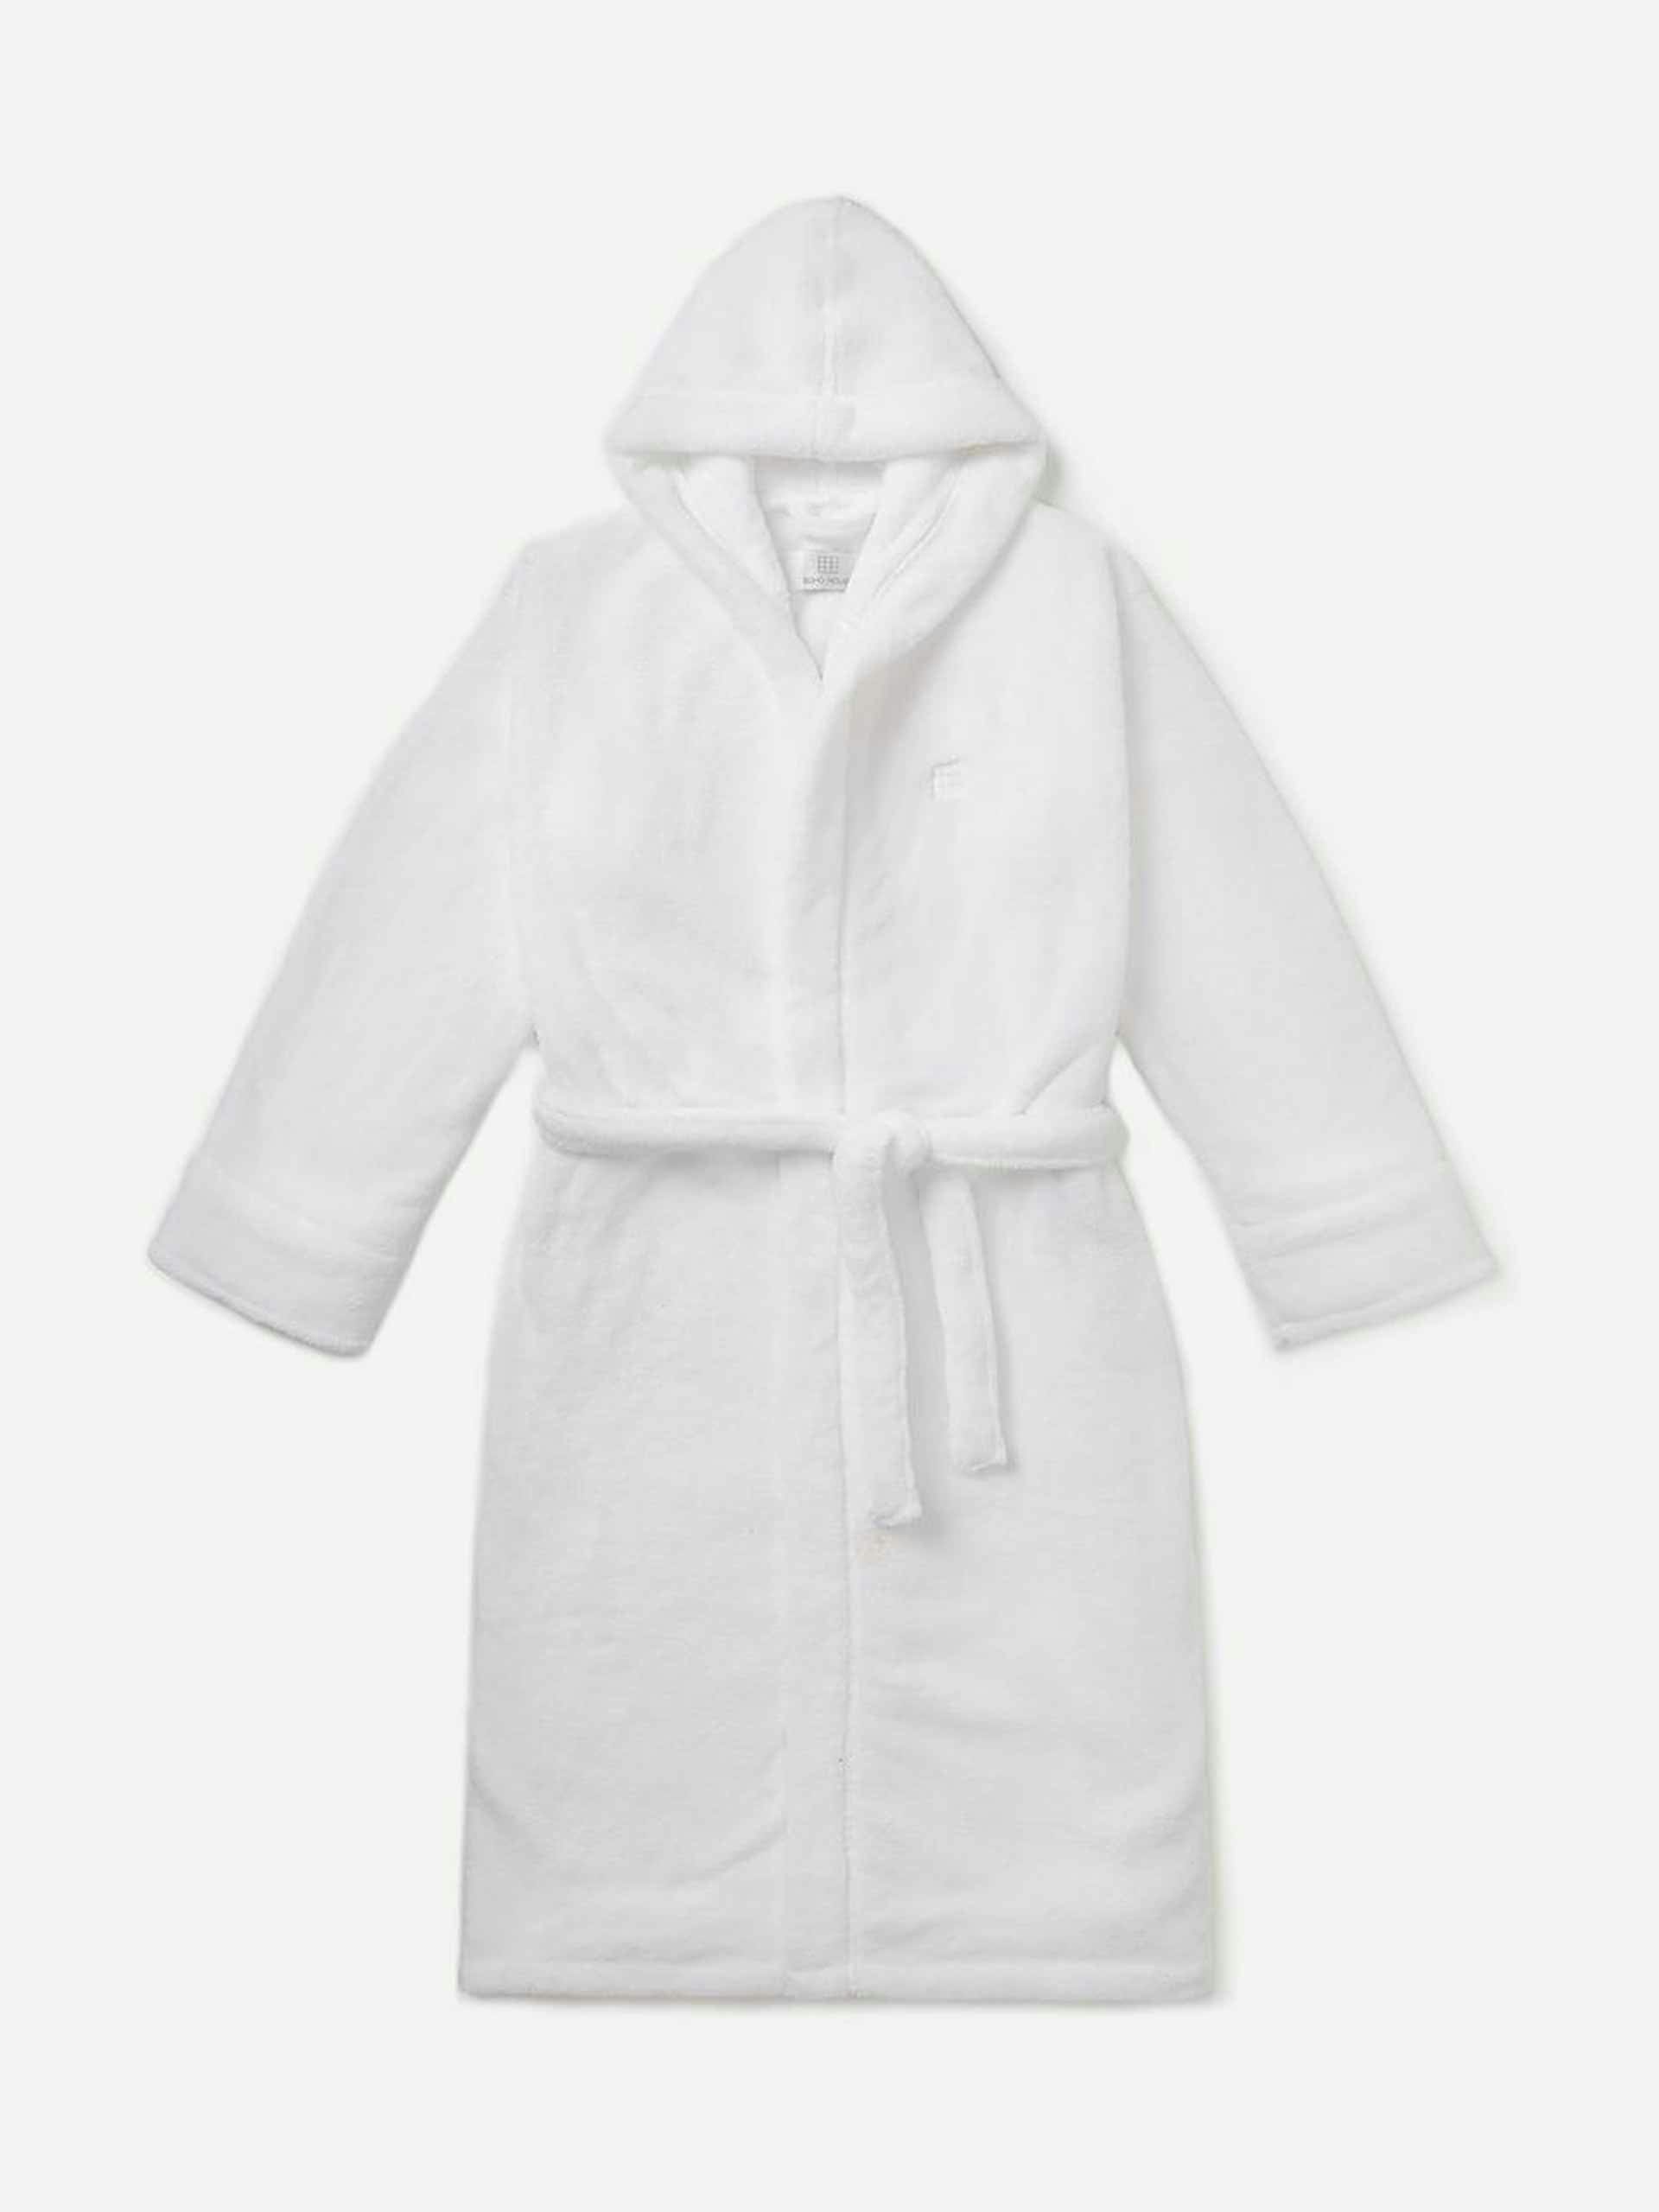 Fluffy hooded robe with attached belt